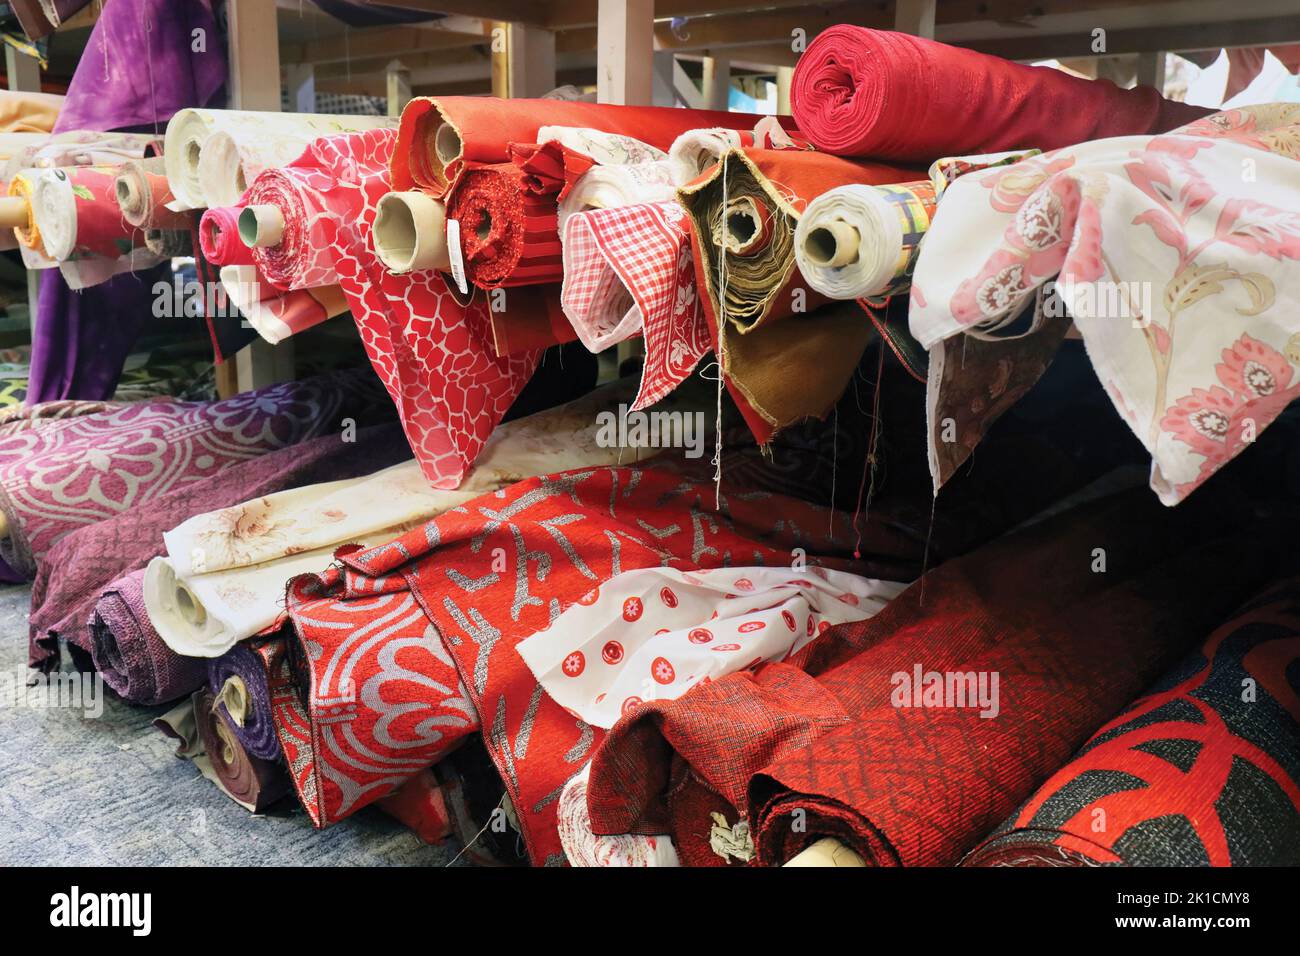 Rolls of material in a fabric shop. Stock Photo